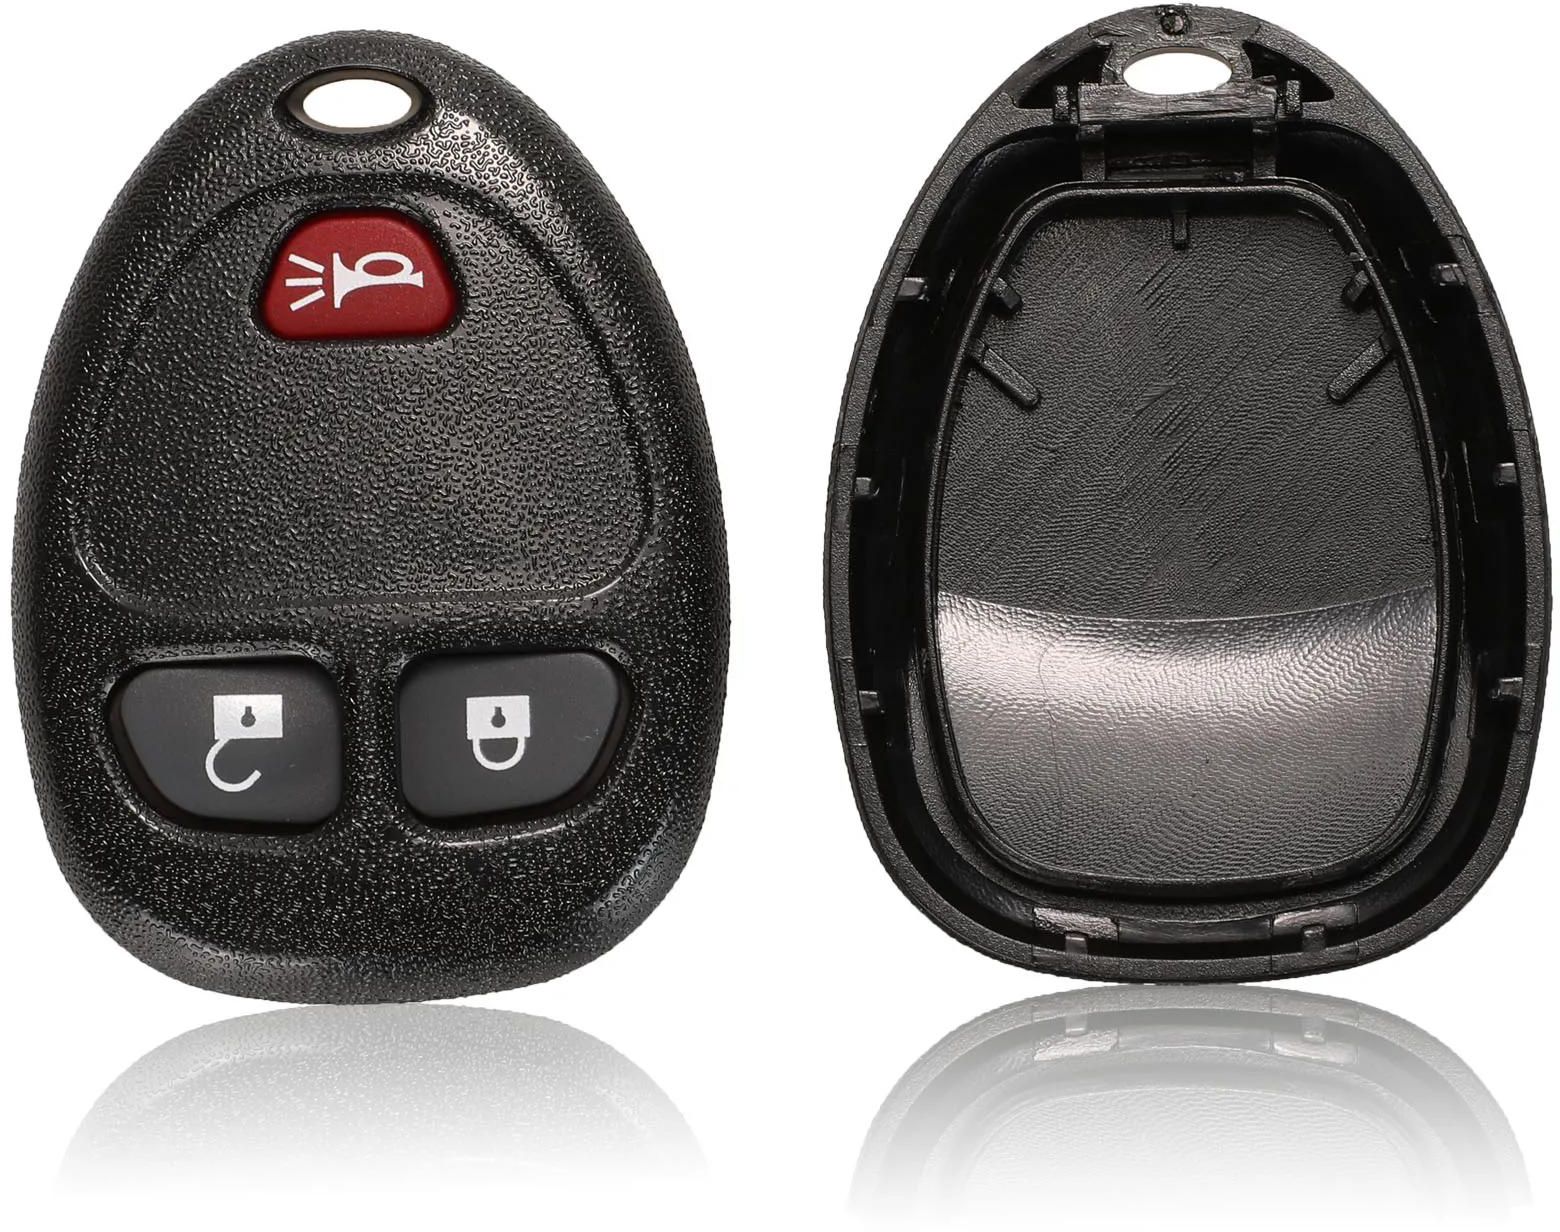 3 Buttons Car Key Shell Cover Fob Entry Keyless Case For Buick For Gmc Chevrolet Enclave 2009-2014 Remote Ouc60270G